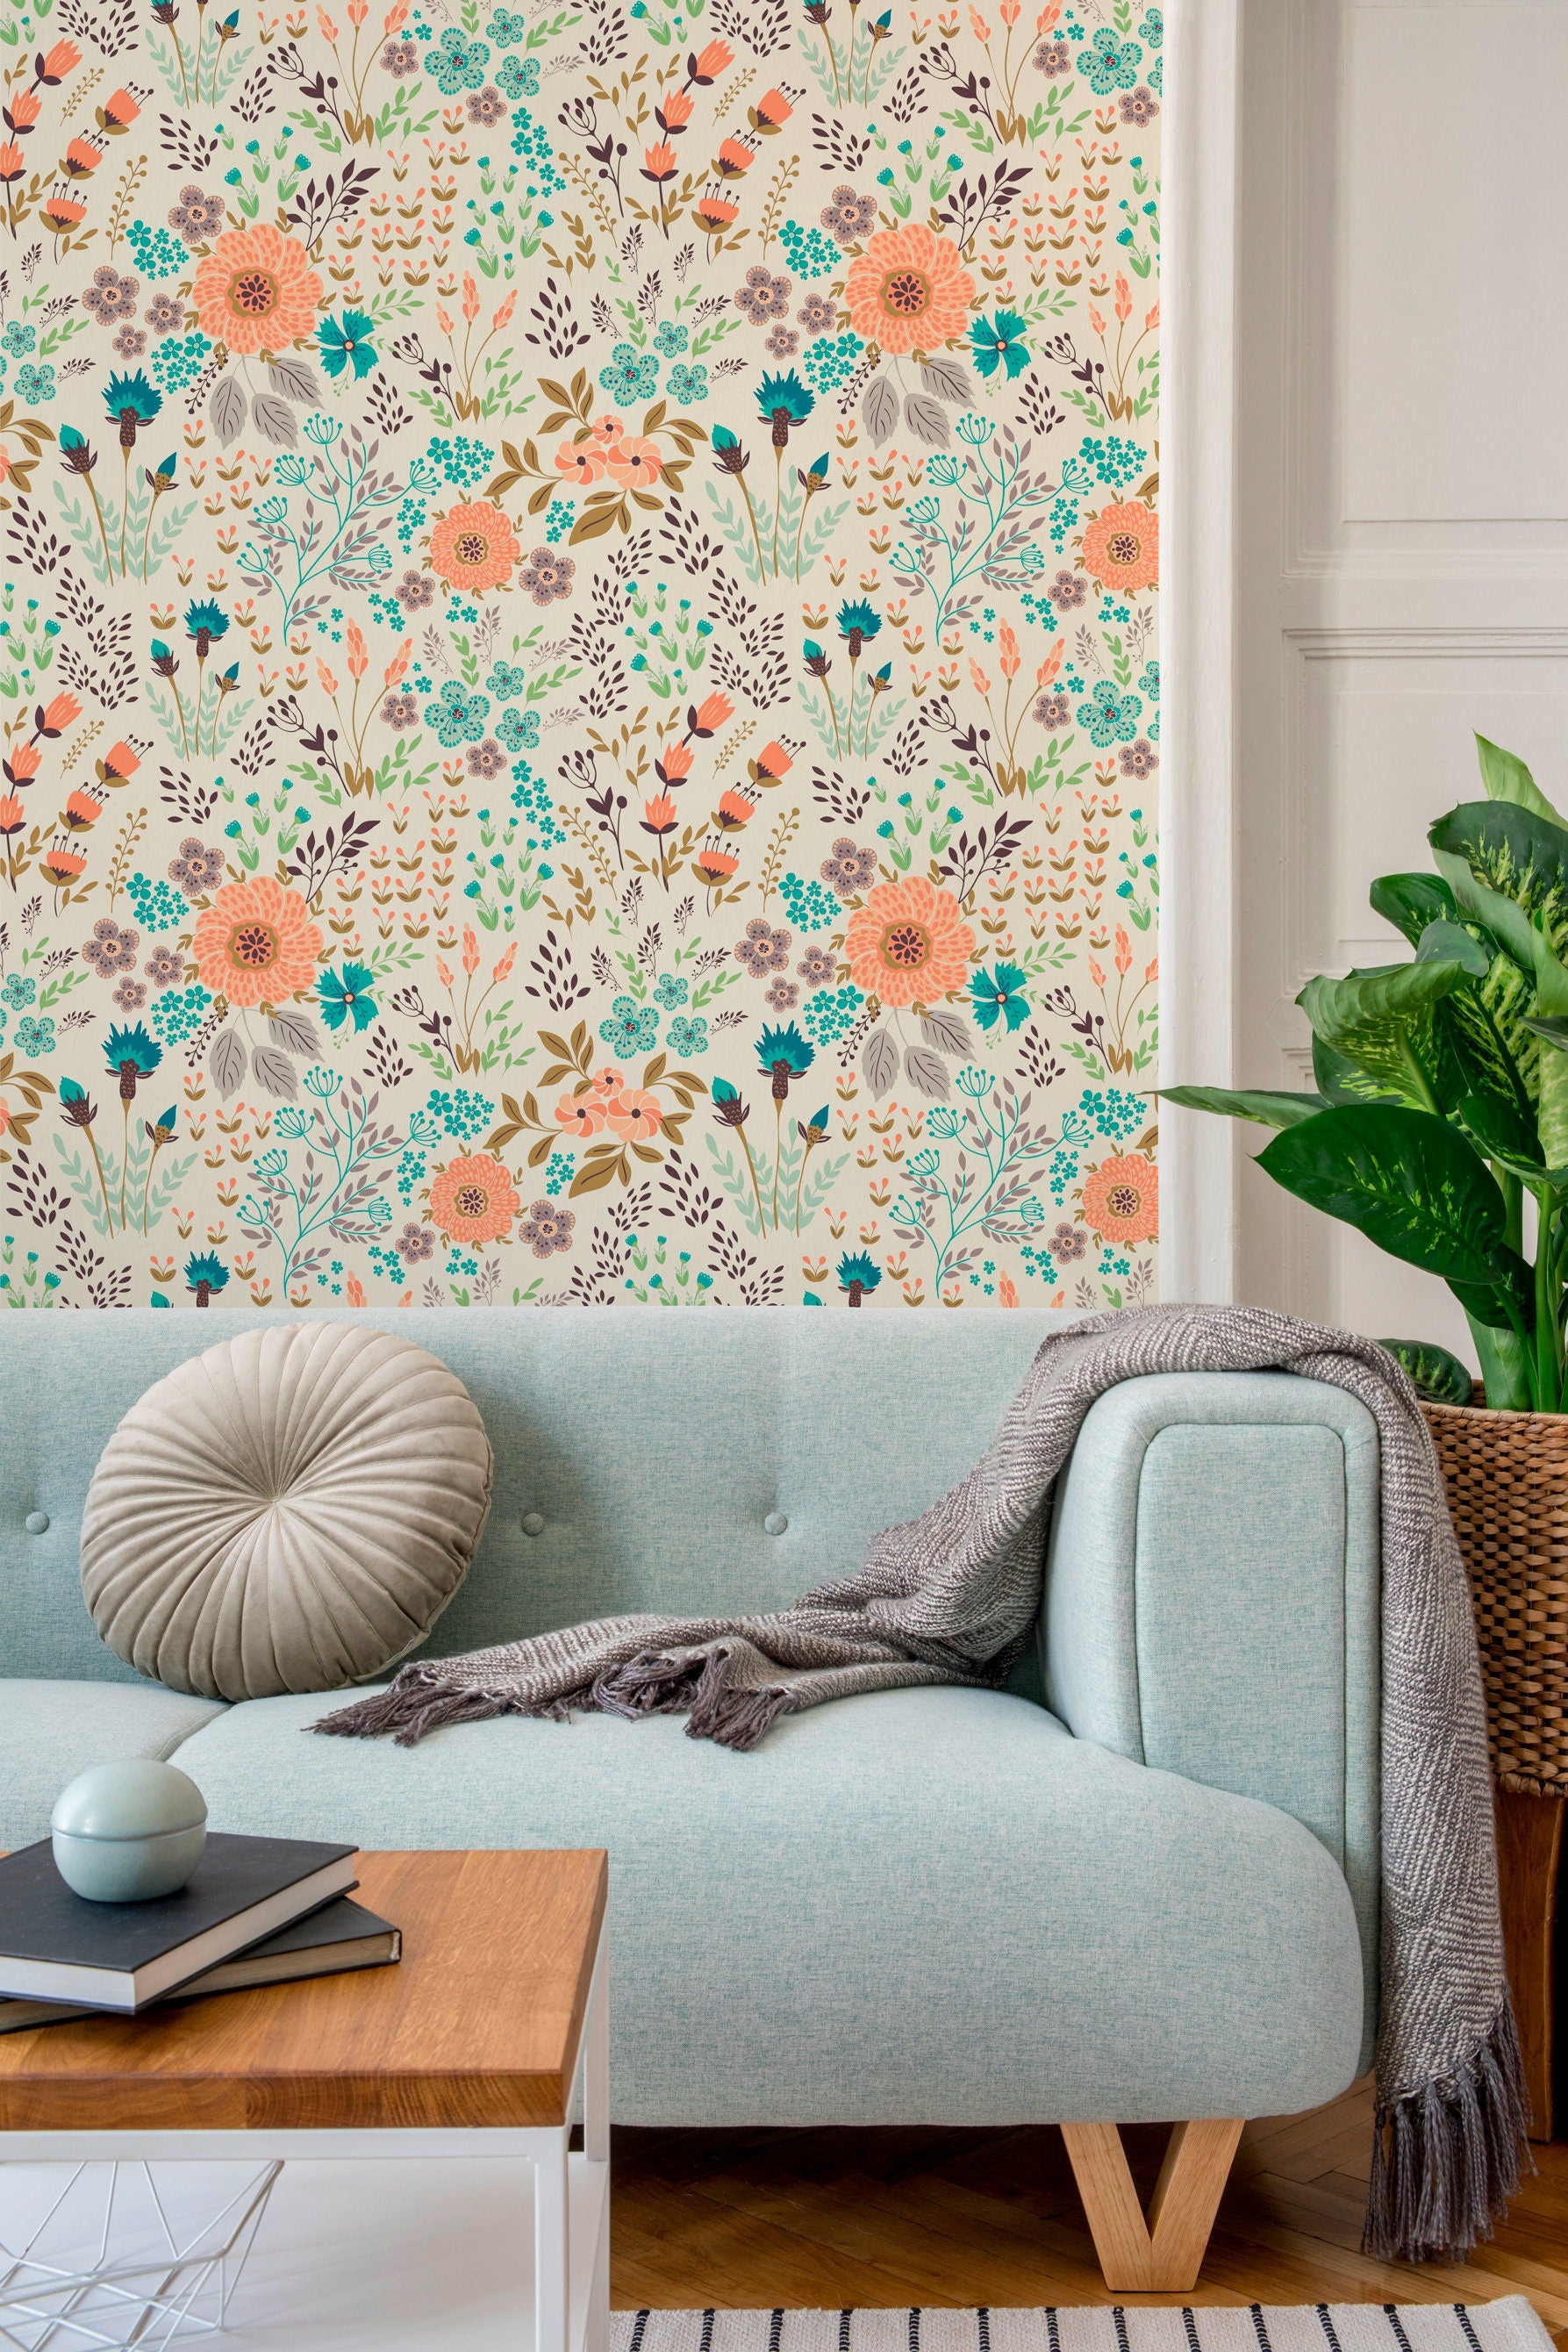 Floral Temporary Wallpaper Removable Wallpaper Wall Decor Home Decor Wall Art Printable Wall Art Room Decor Wall Prints Wall Hanging - B580